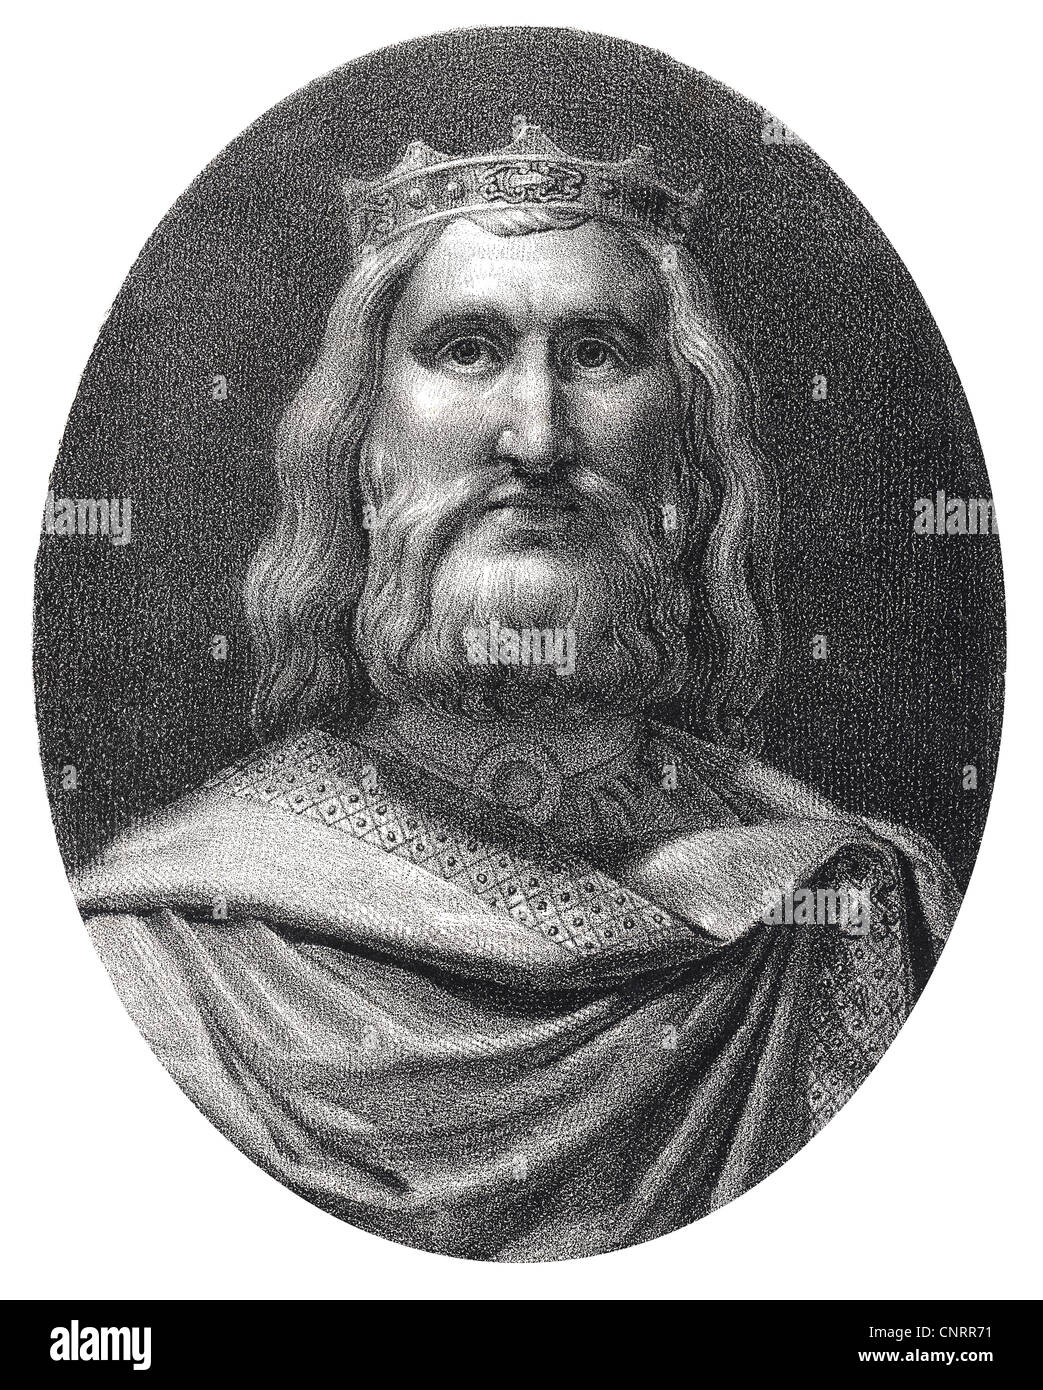 Frankish king of the Merovingian dynasty, Chlodwig I or Chlodowech or Clovis or Chlodovechus, the founder of the Frankish Empire Stock Photo